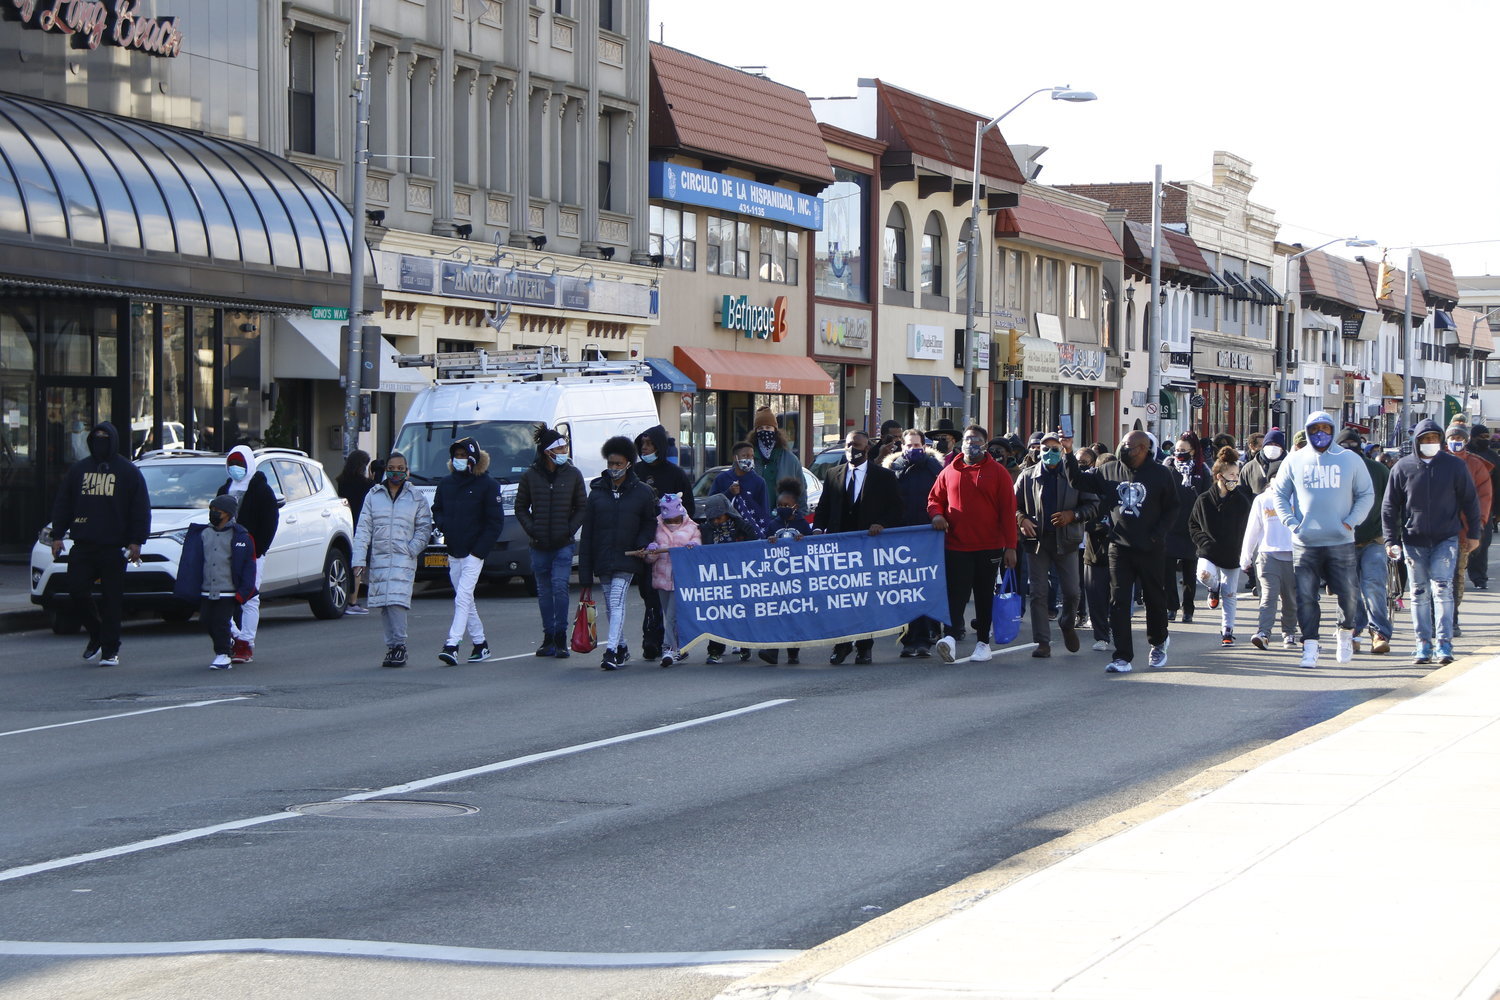 The Martin Luther King Center hosted a march with a sizable turnout last year.